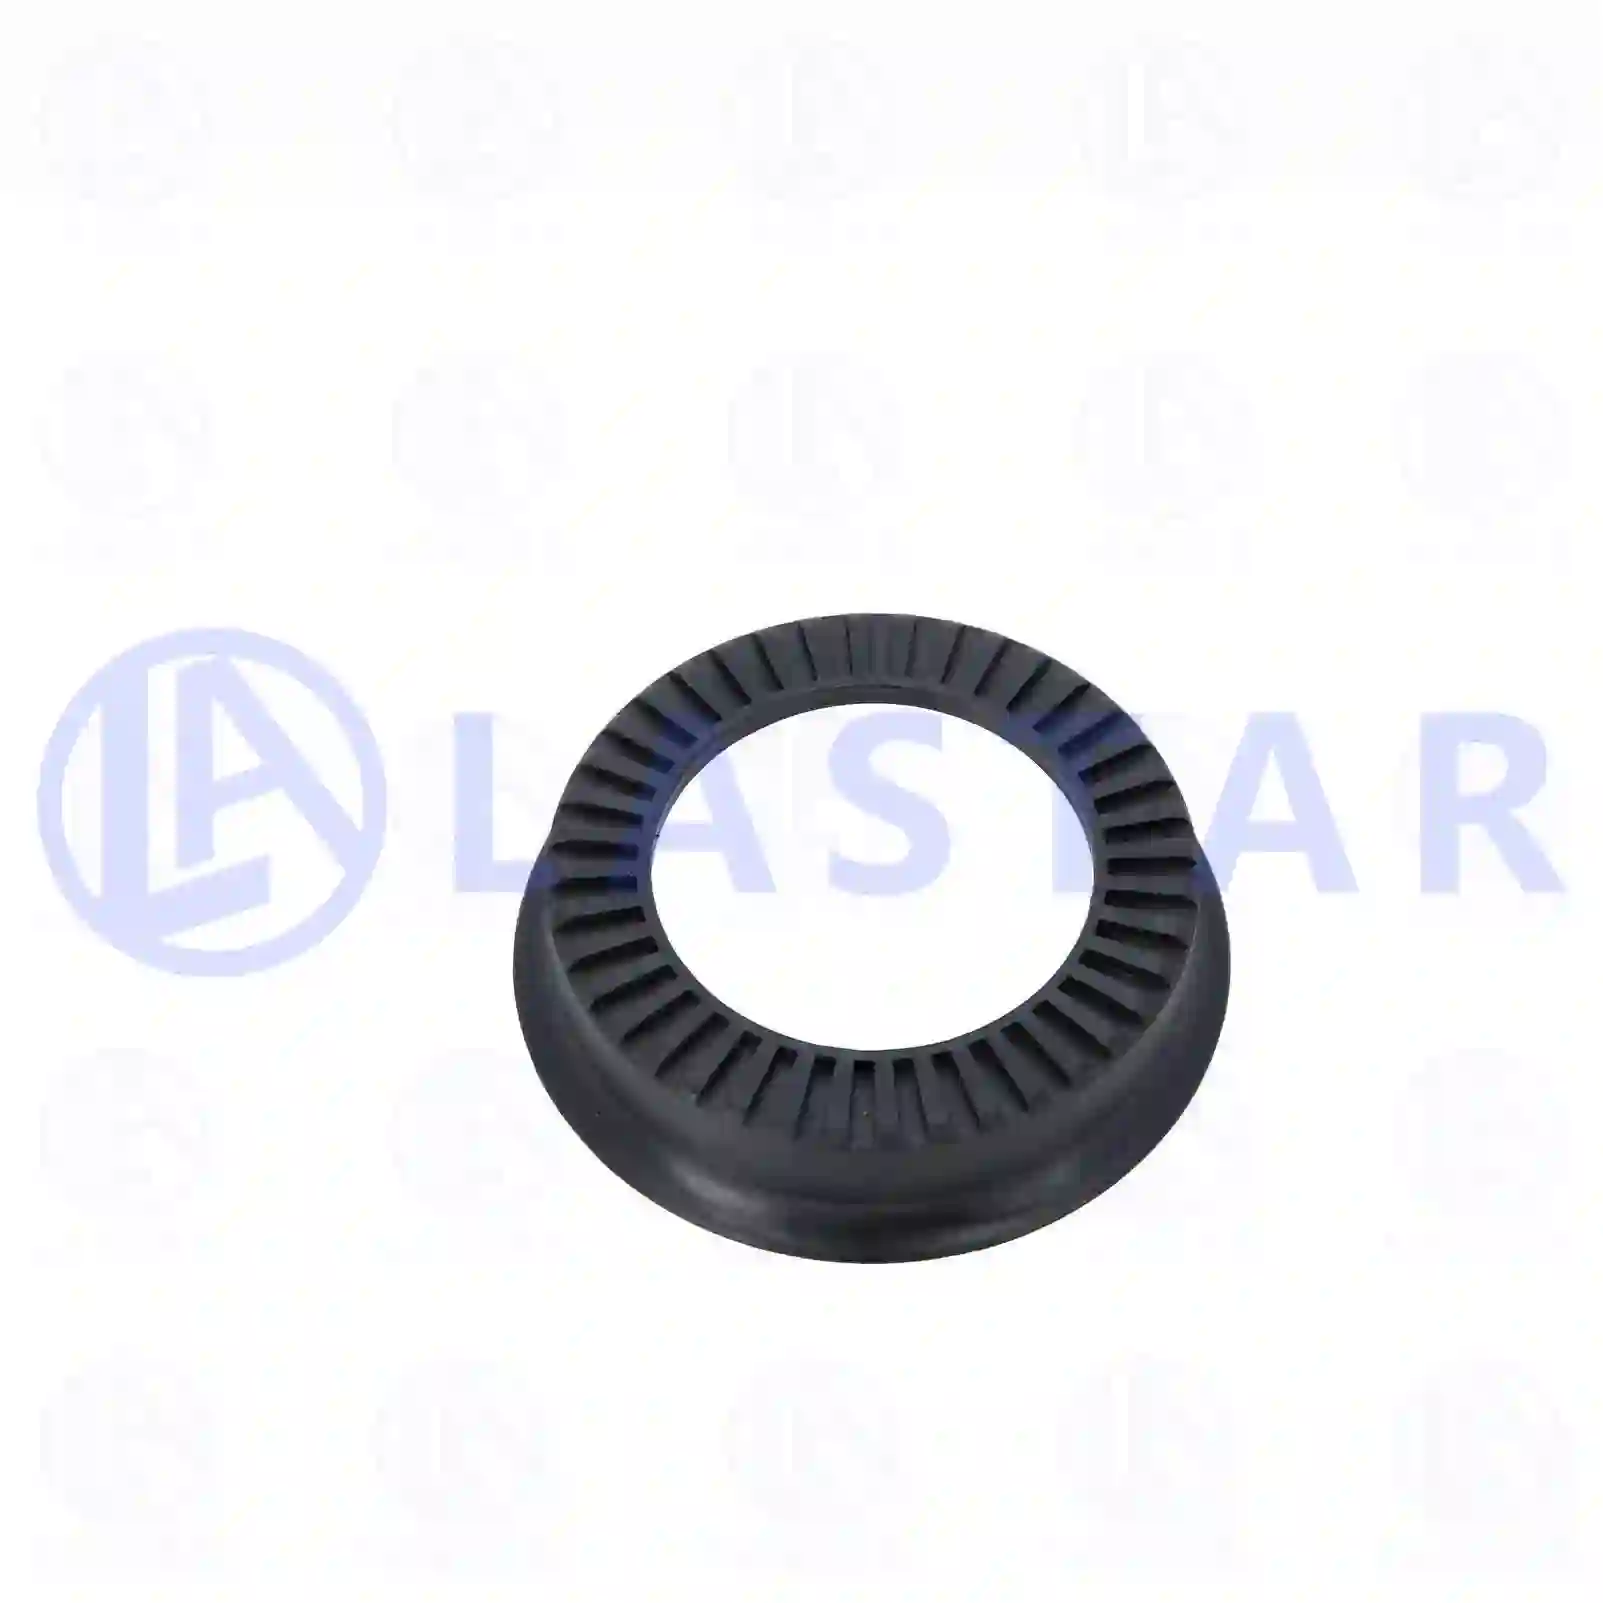 Intermediate ring, cabin shock absorber, 77735721, 7420734773, 1076697, 20734773, ZG41260-0008 ||  77735721 Lastar Spare Part | Truck Spare Parts, Auotomotive Spare Parts Intermediate ring, cabin shock absorber, 77735721, 7420734773, 1076697, 20734773, ZG41260-0008 ||  77735721 Lastar Spare Part | Truck Spare Parts, Auotomotive Spare Parts